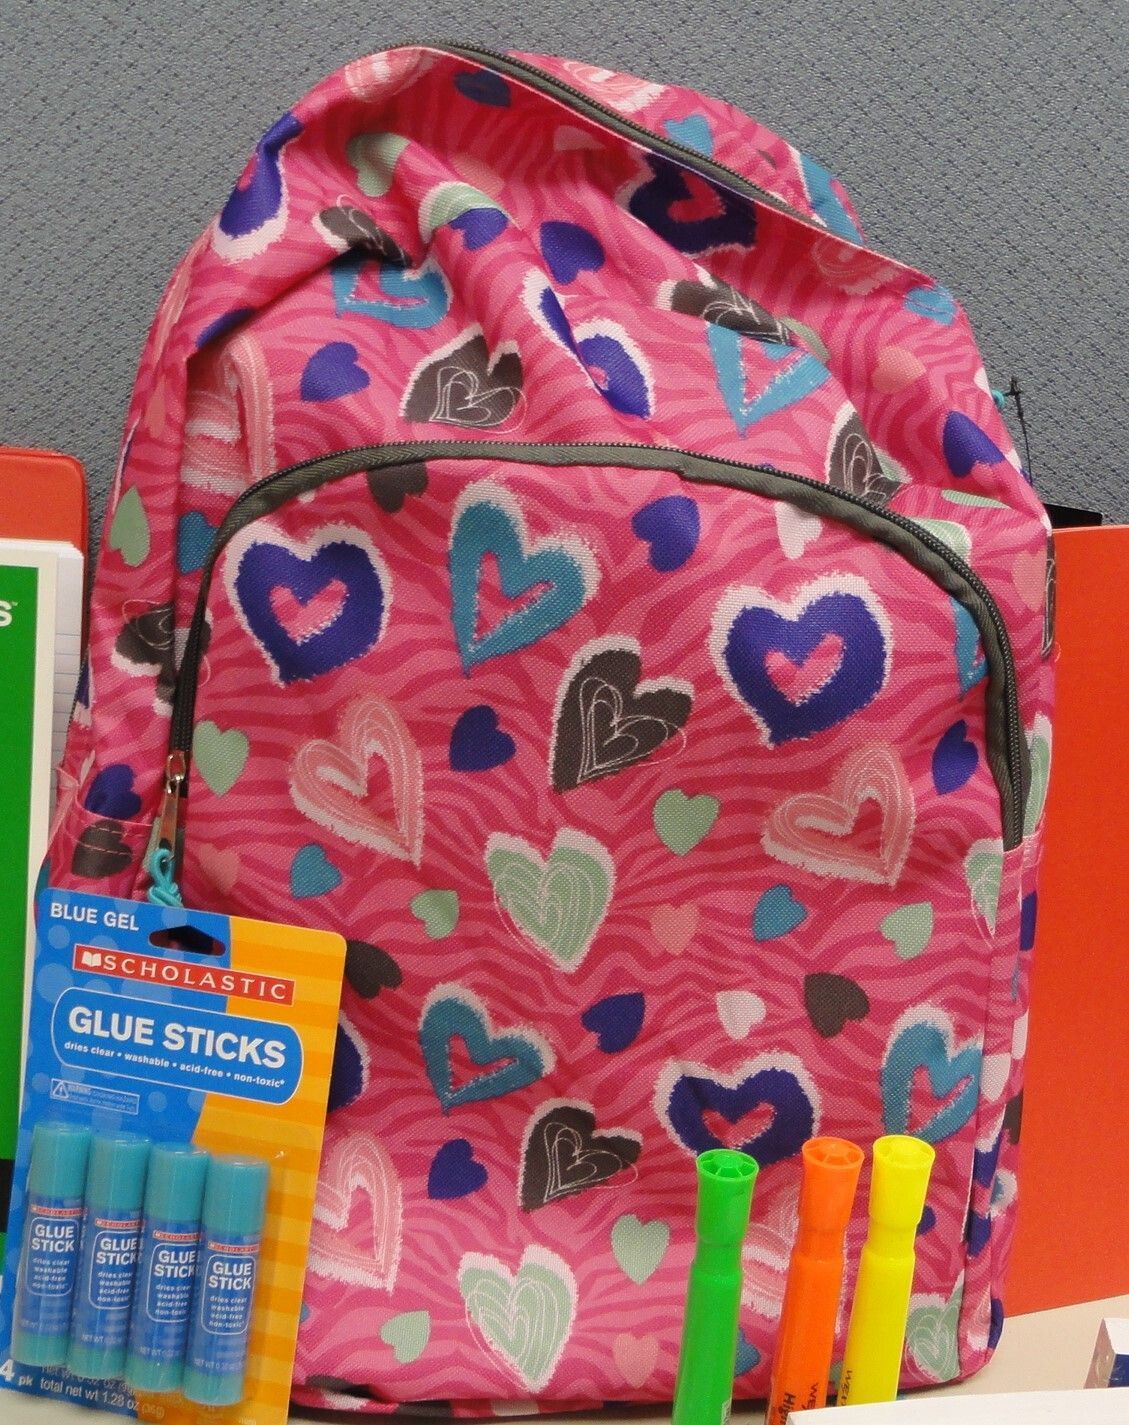 Backpacks Needed for Young Girls. Distribution is July 15th - August 30th.